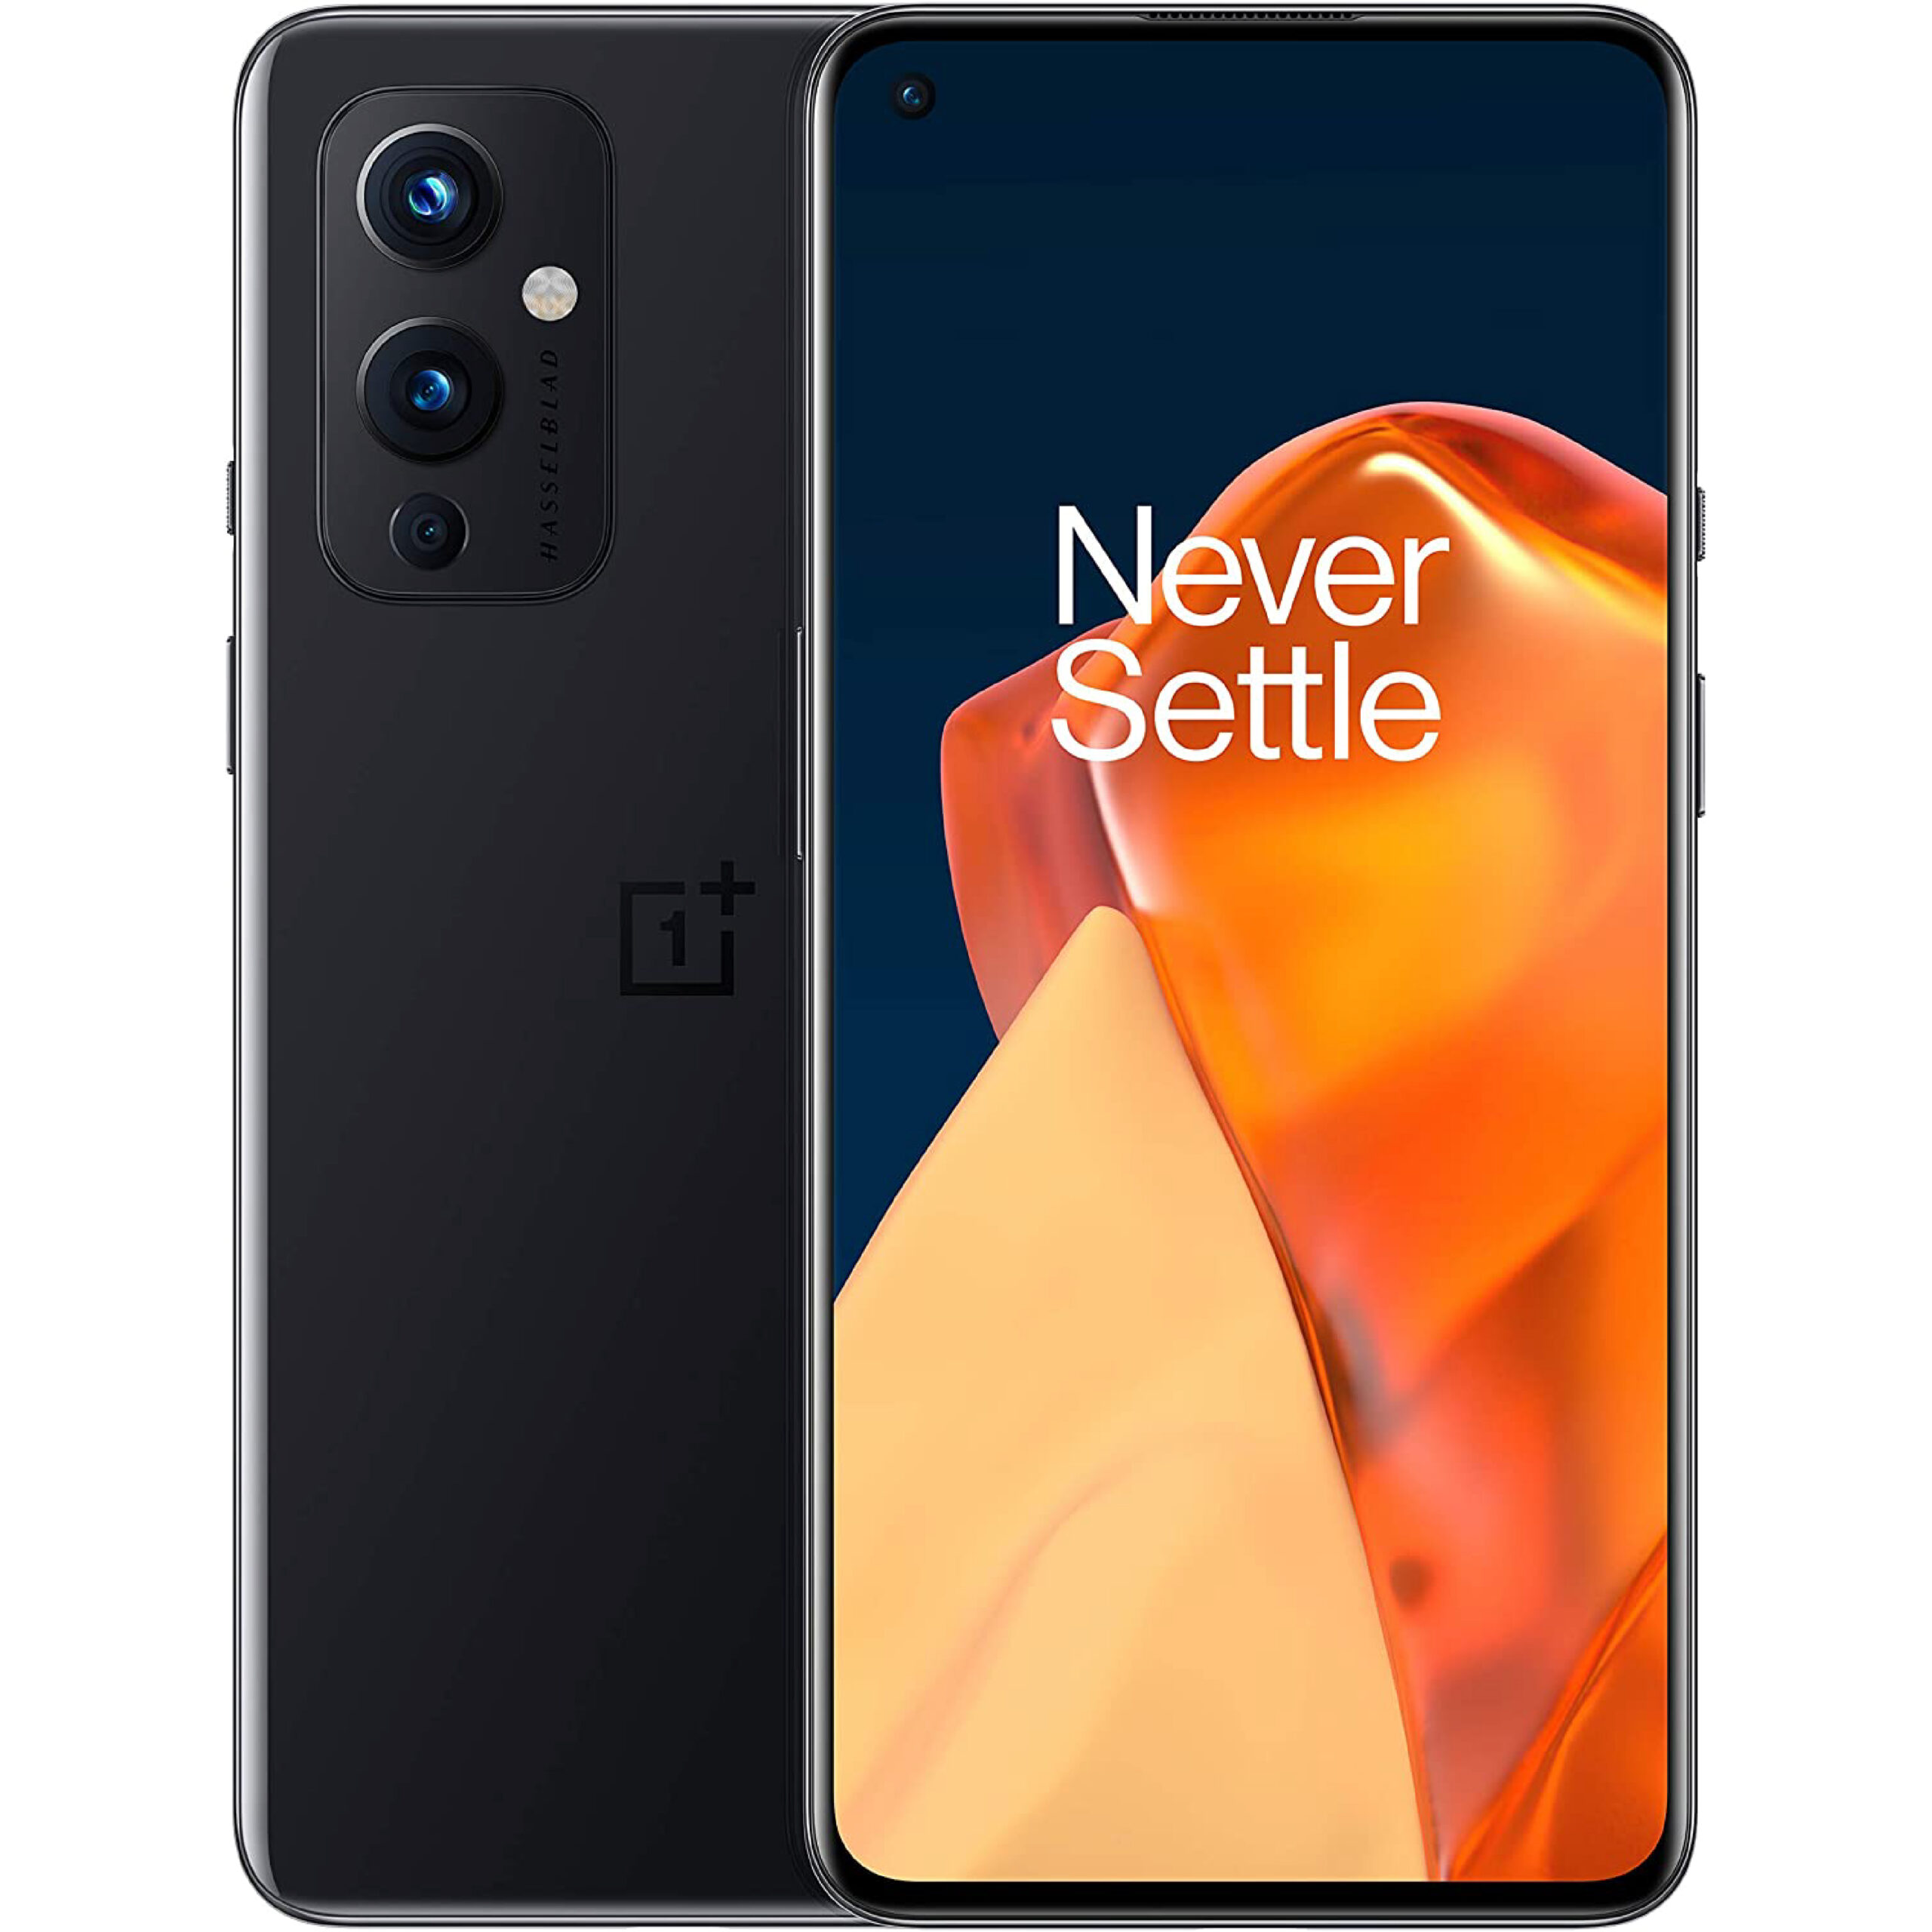 OnePlus 9 5G Android Smartphone 128GB Triple Camera. Patrick Will's main phone for work, everyday life and content creation.